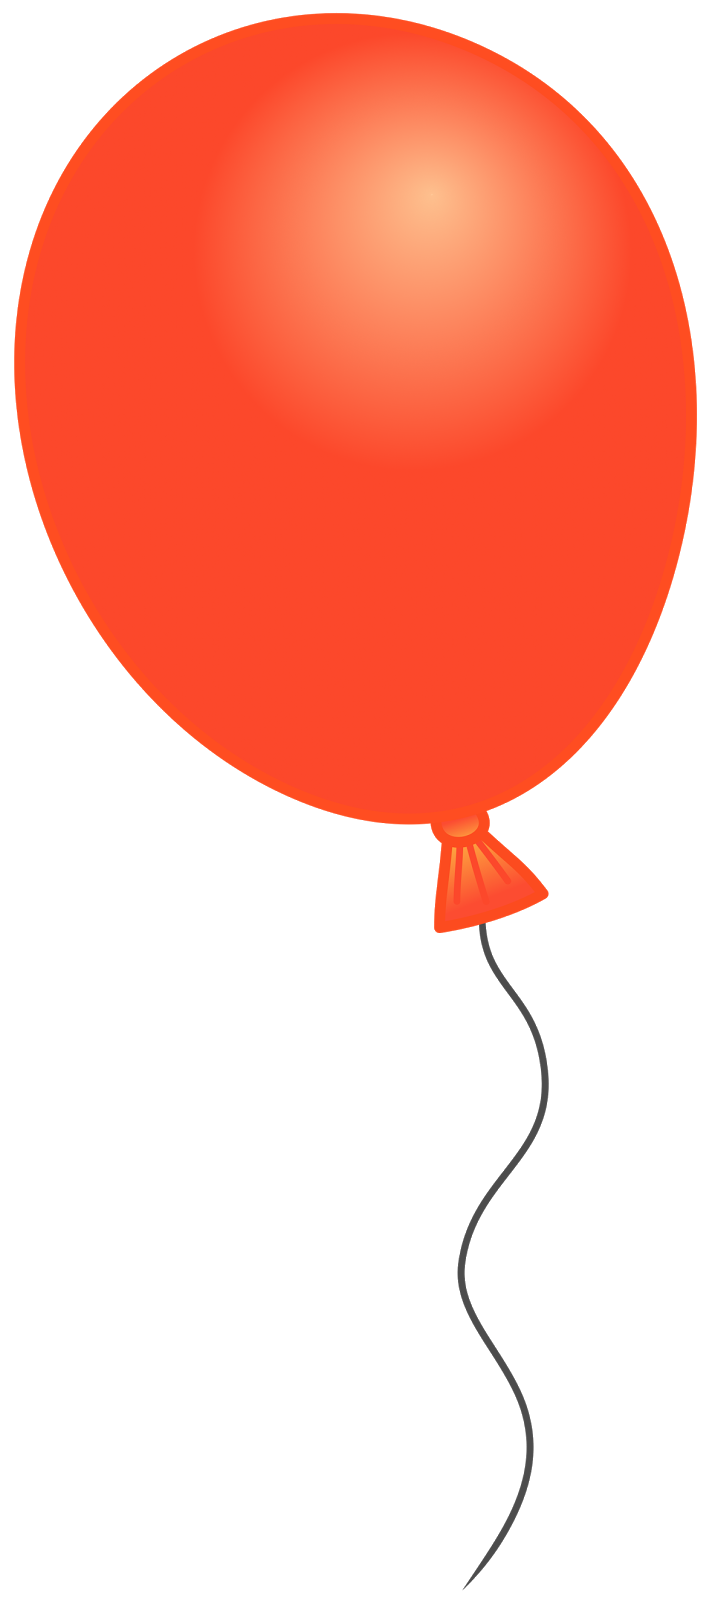 Single Balloon PNG Image Transparent Background